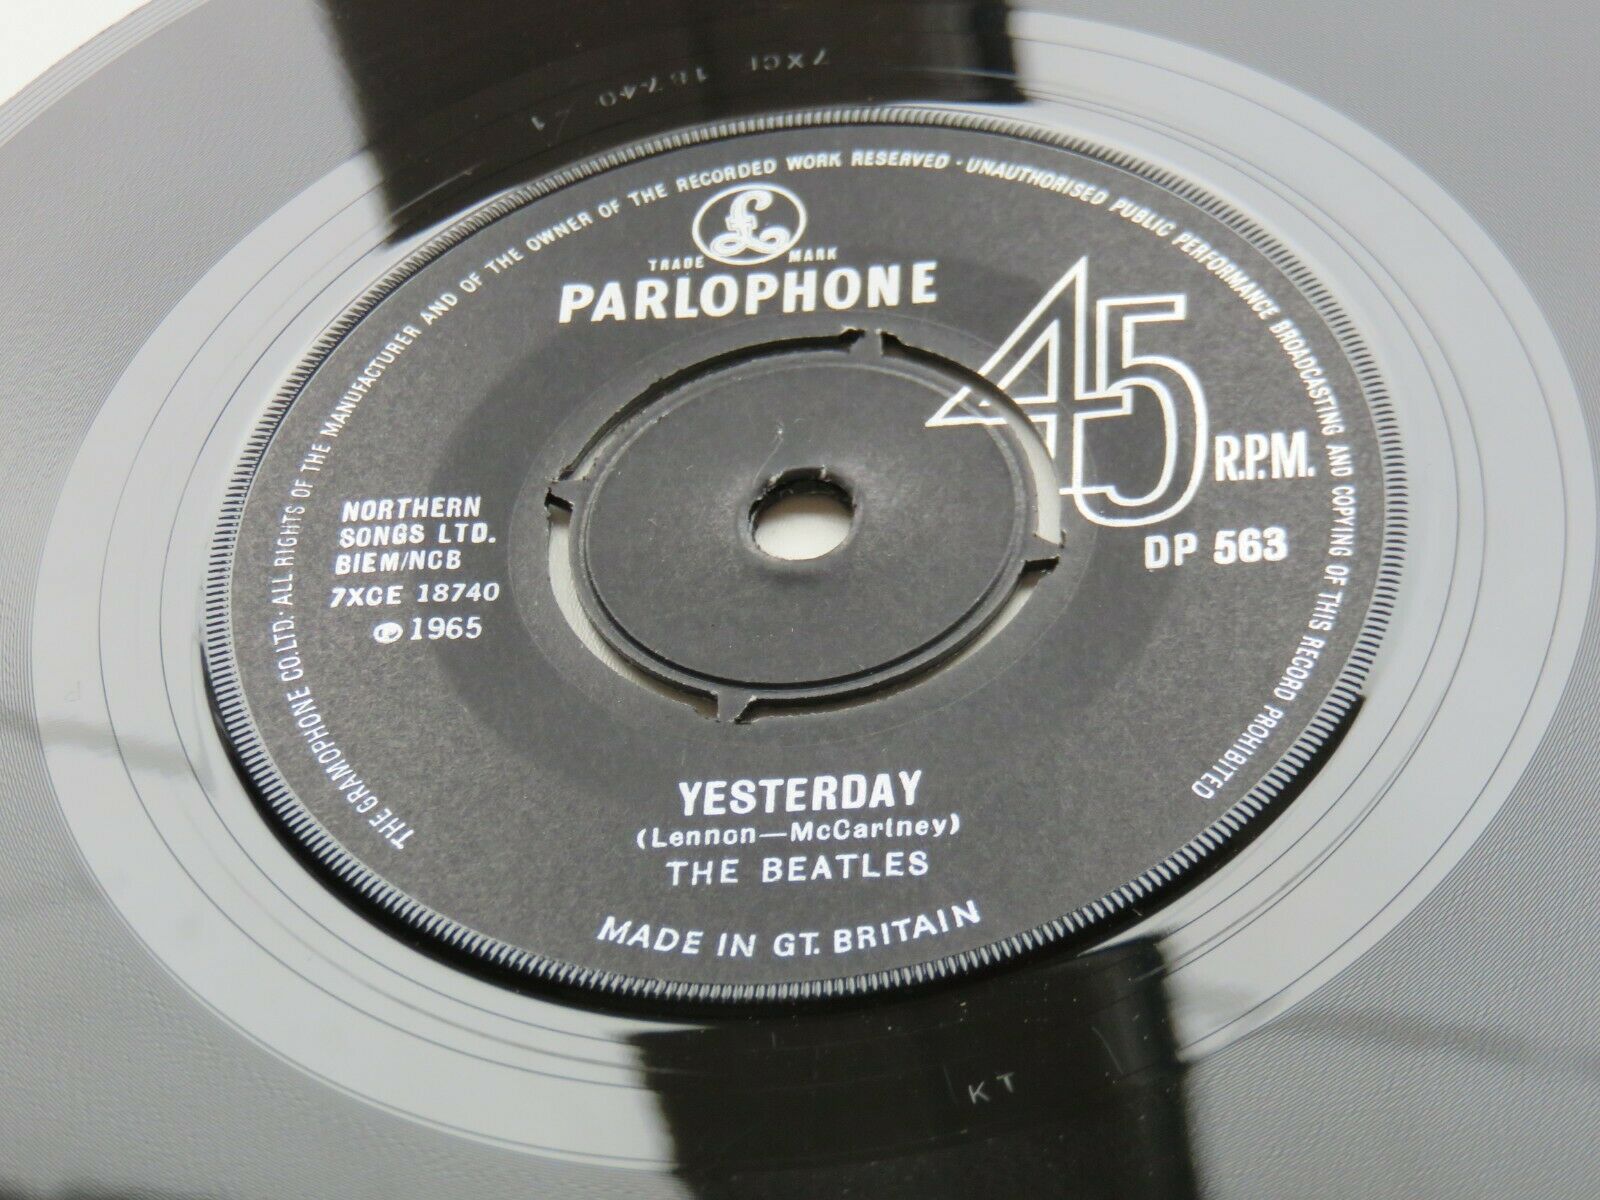 Pic 2 THE BEATLES 1965 EXPORT 45  YESTERDAY  DIZZY MISS LIZZY   PARLOPHONE  DP 563 EX+